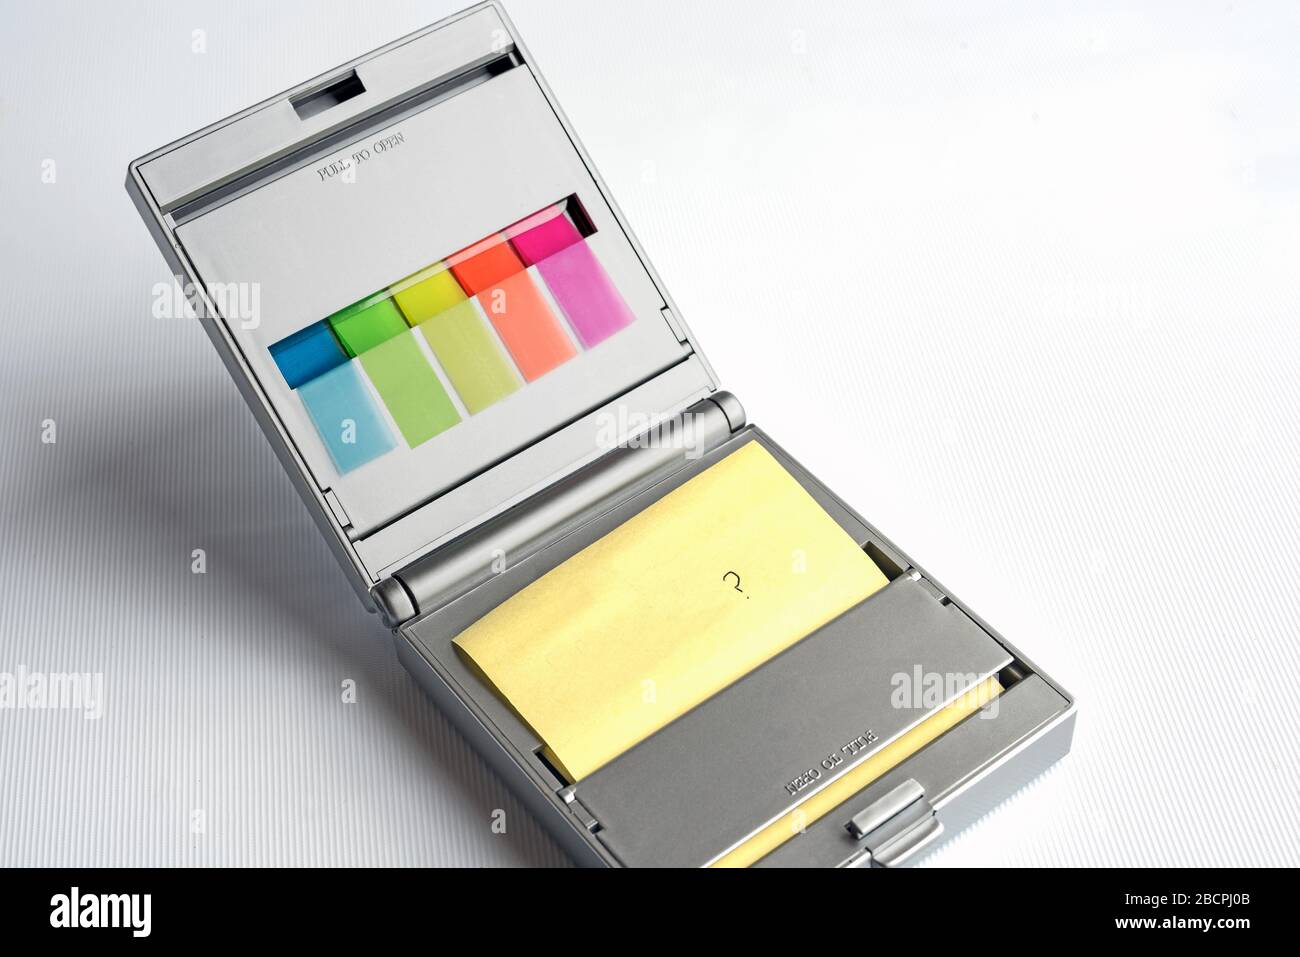 Silver dispenser of yellow postit notes and multi coloured sticky index highlighters against a white background, question mark written on postit note. Stock Photo